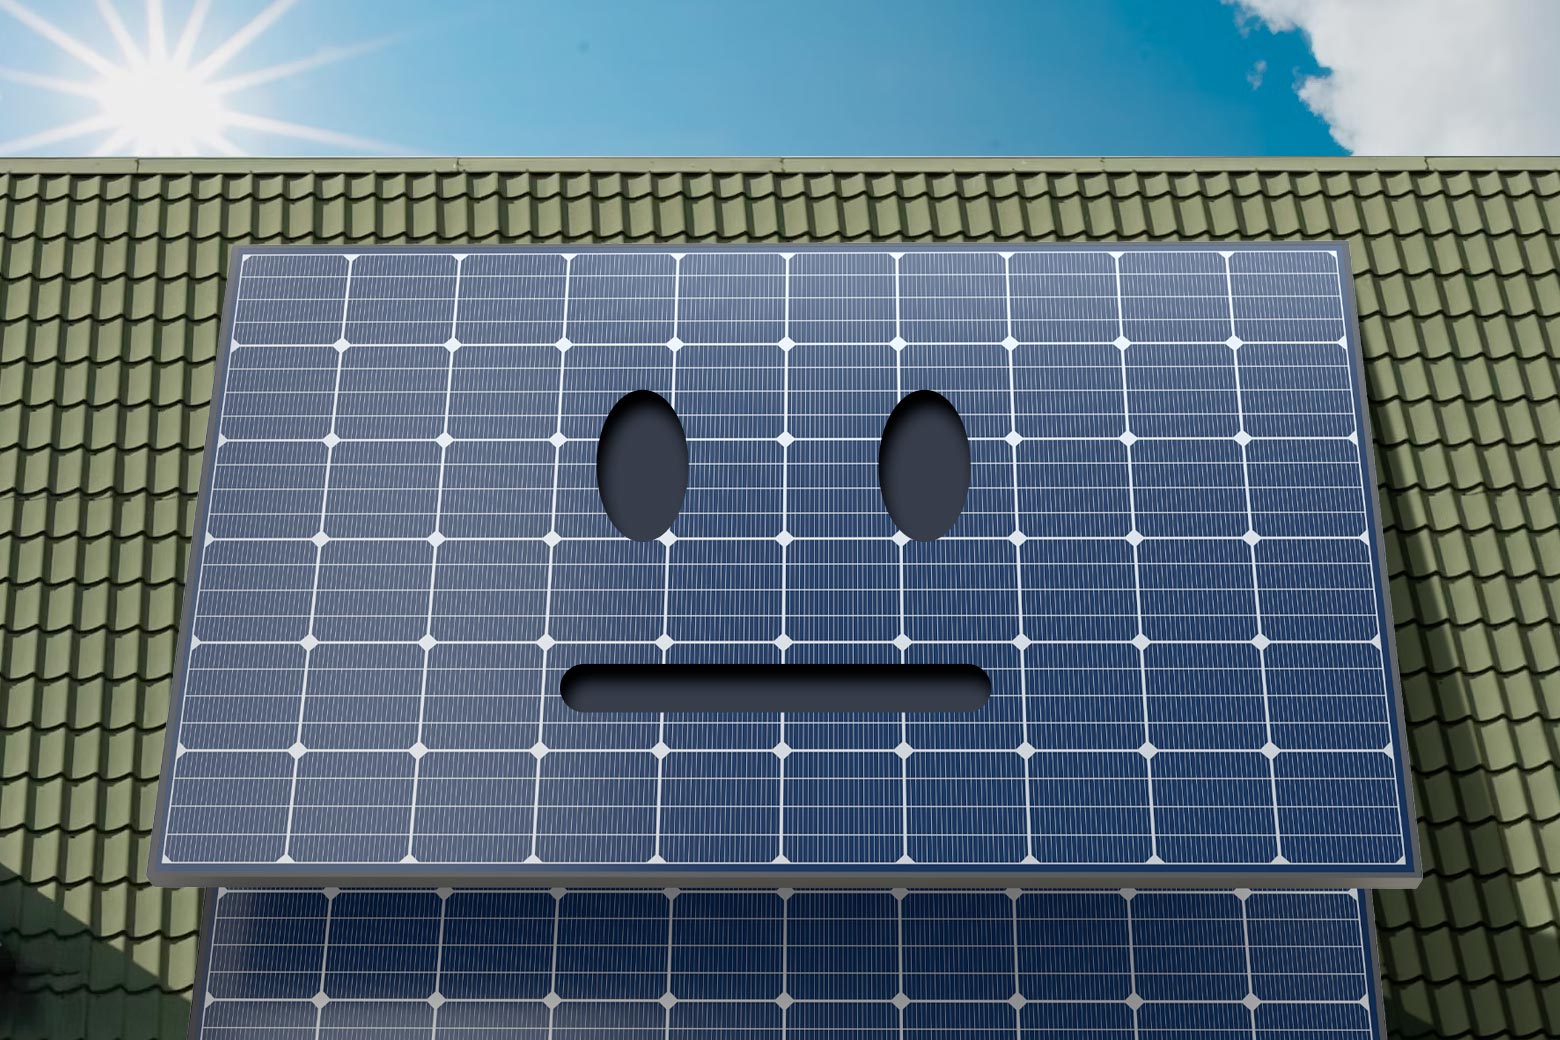 A solar panel with an expressionless face.